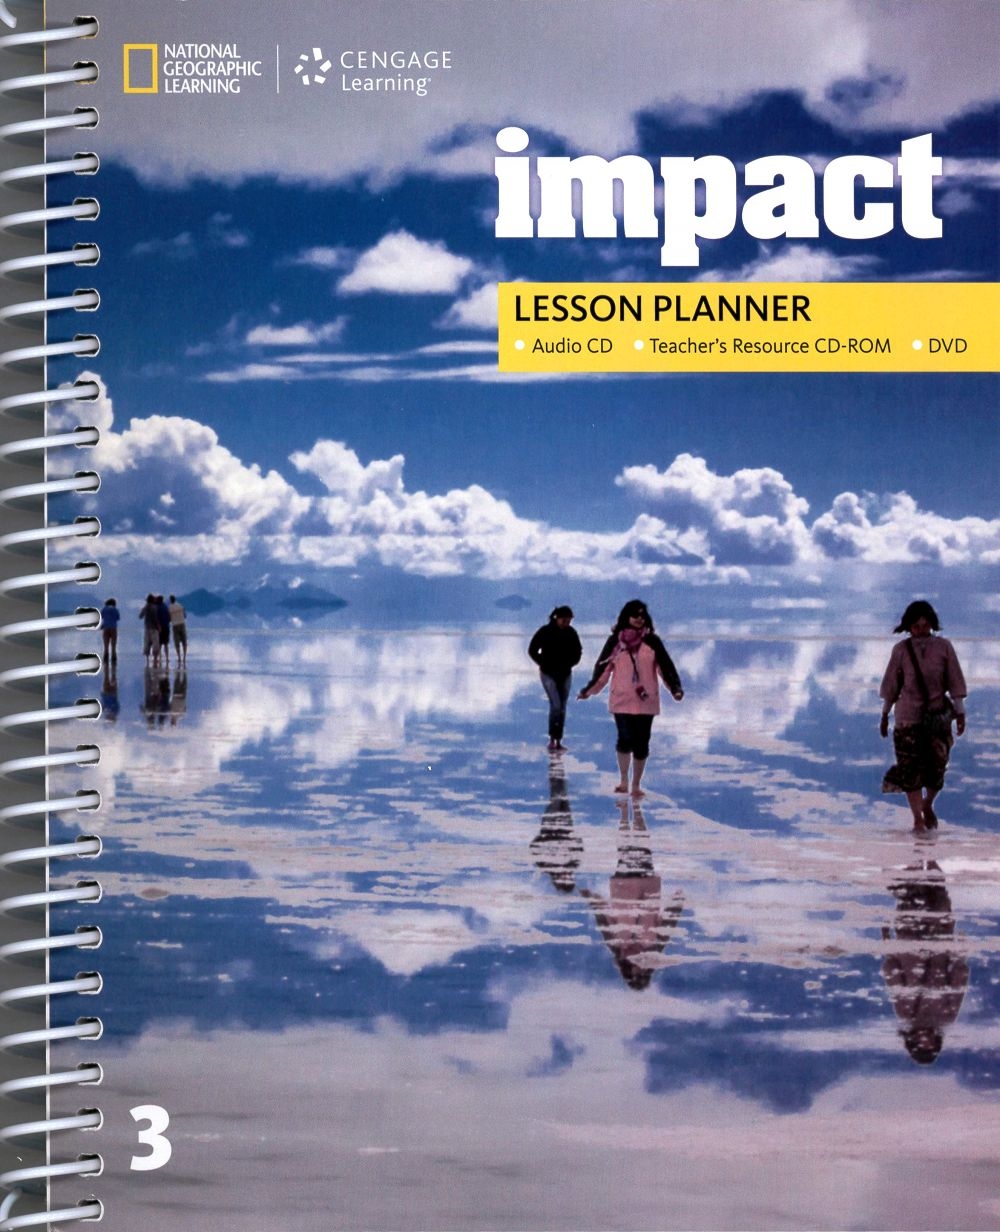 Impact (3) Lesson Planner with MP3 Audio CD/1片, Teacher Resource CD-ROM/1片, and DVD/1片